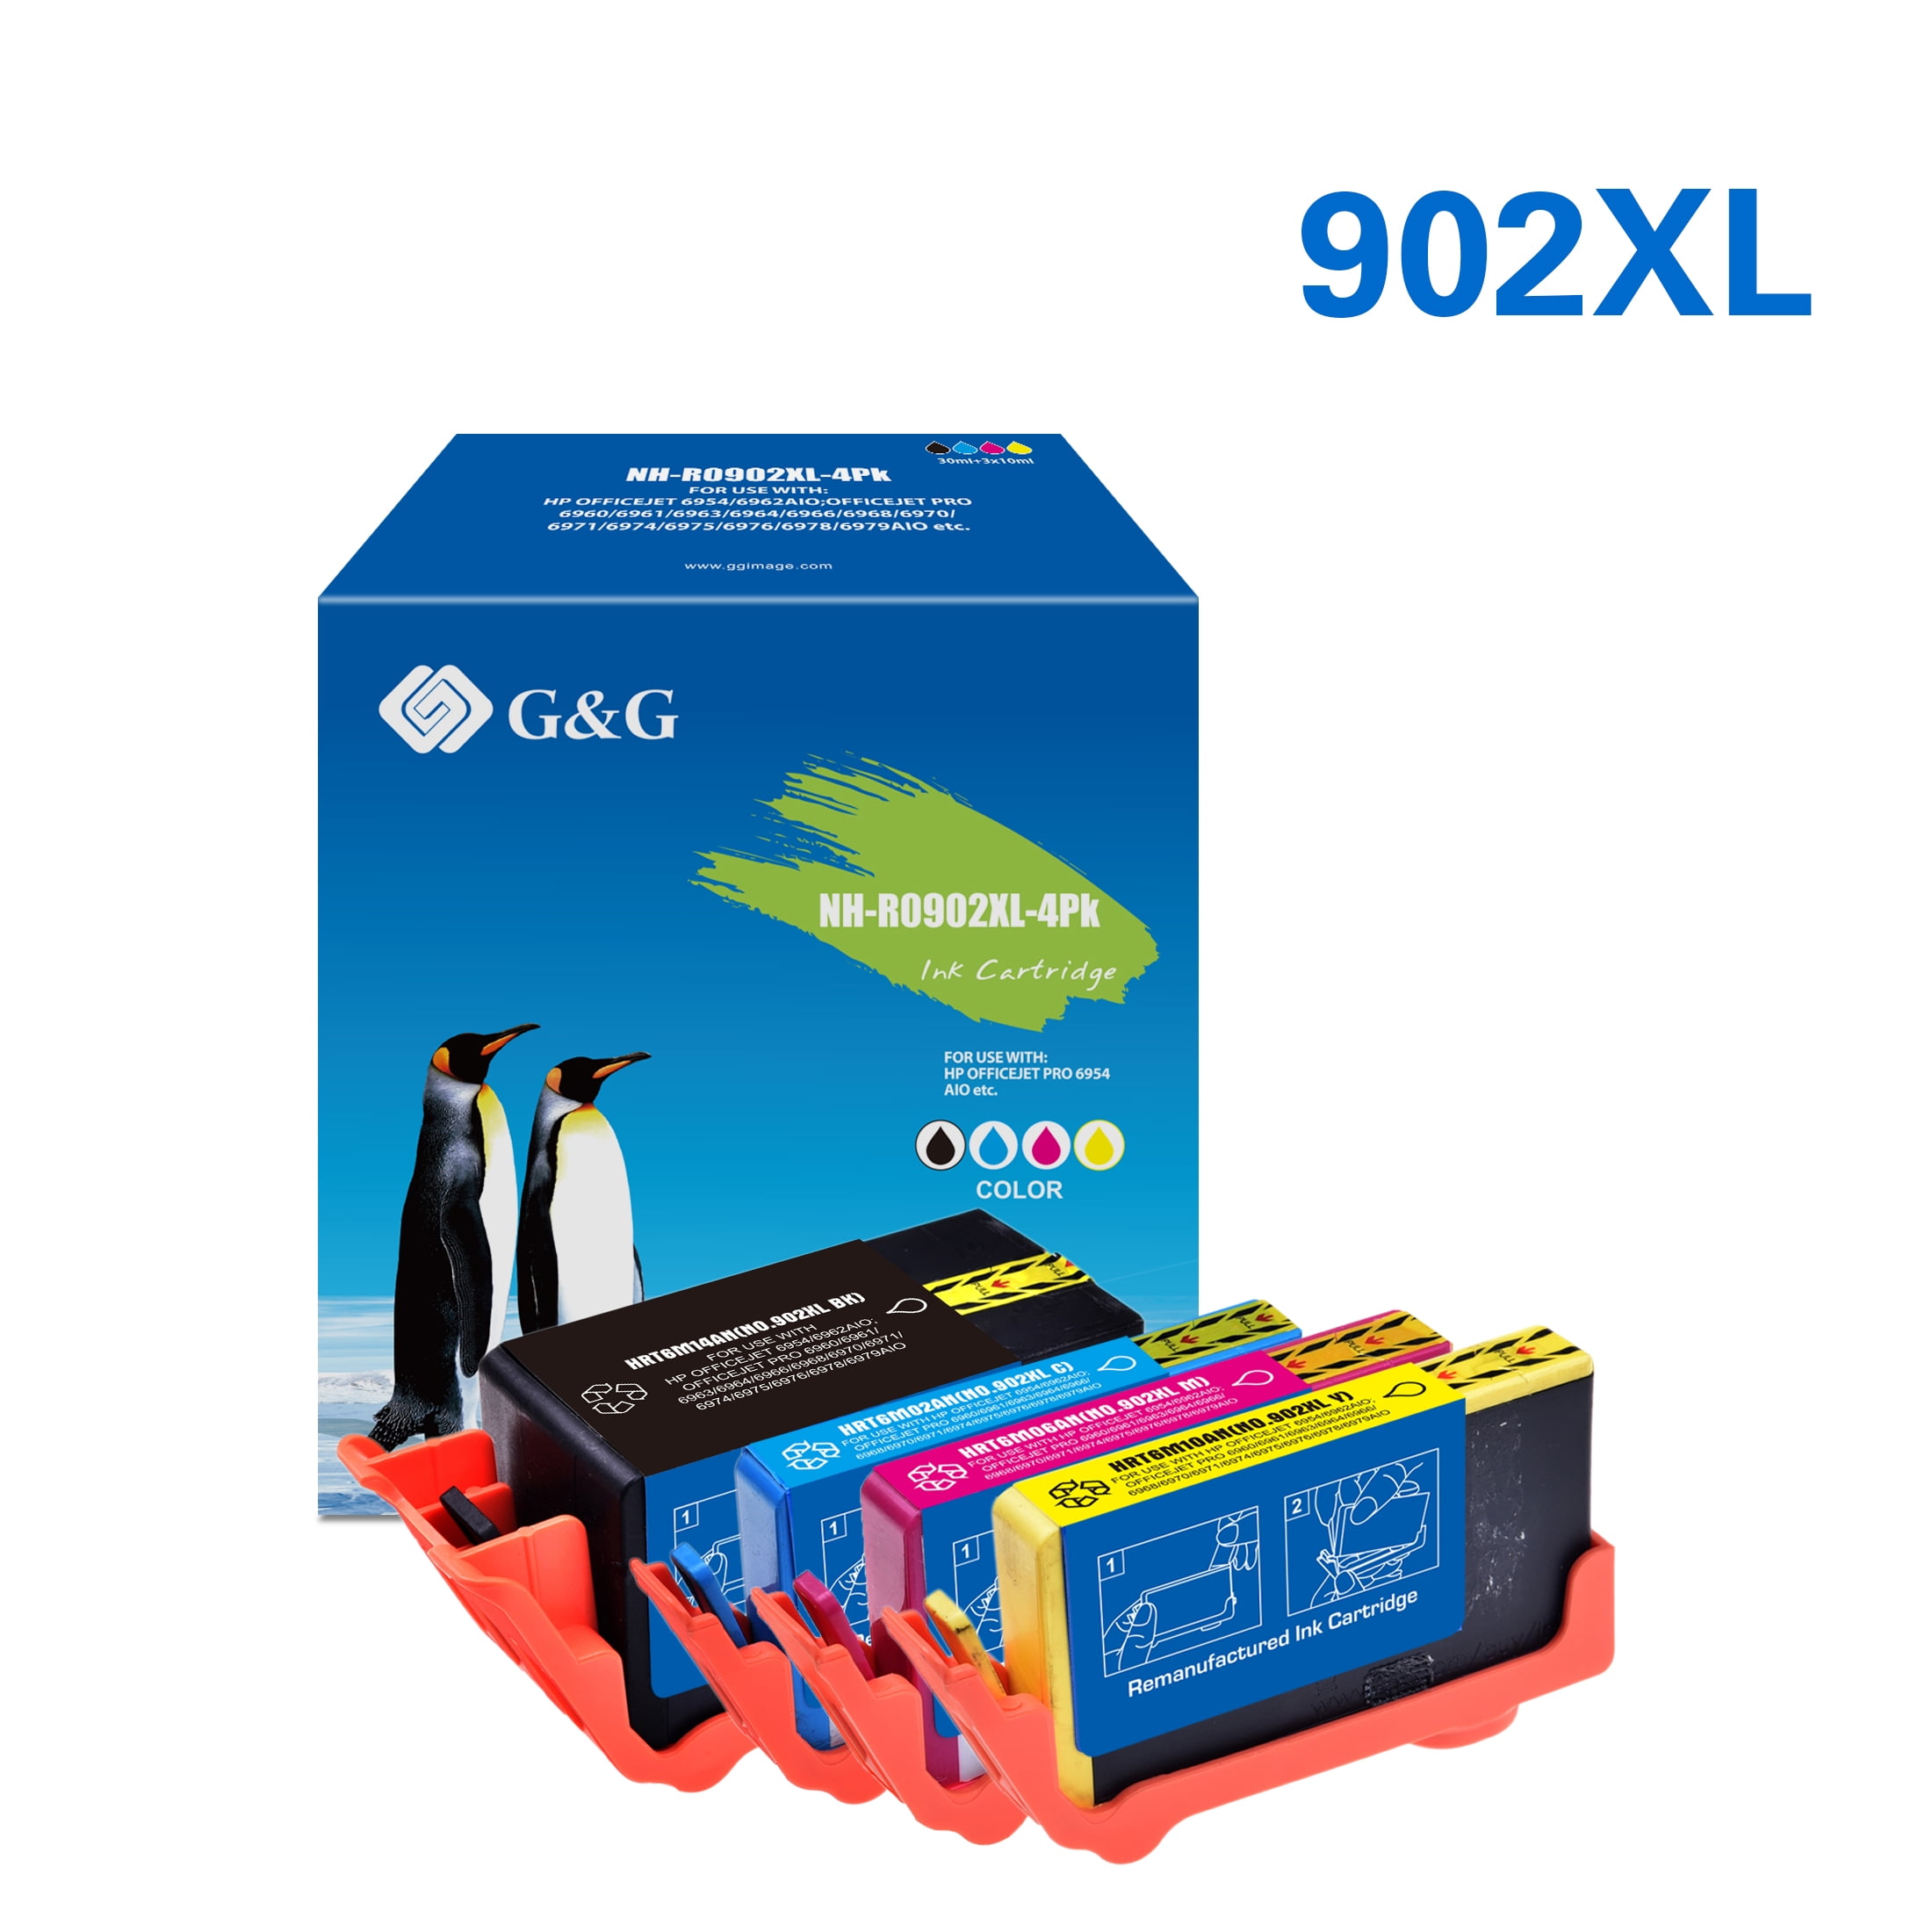 4 Pack 902XL Ink Cartridges for HP 902 XL Officejet Pro 6960 6968 6970 6975 6978 